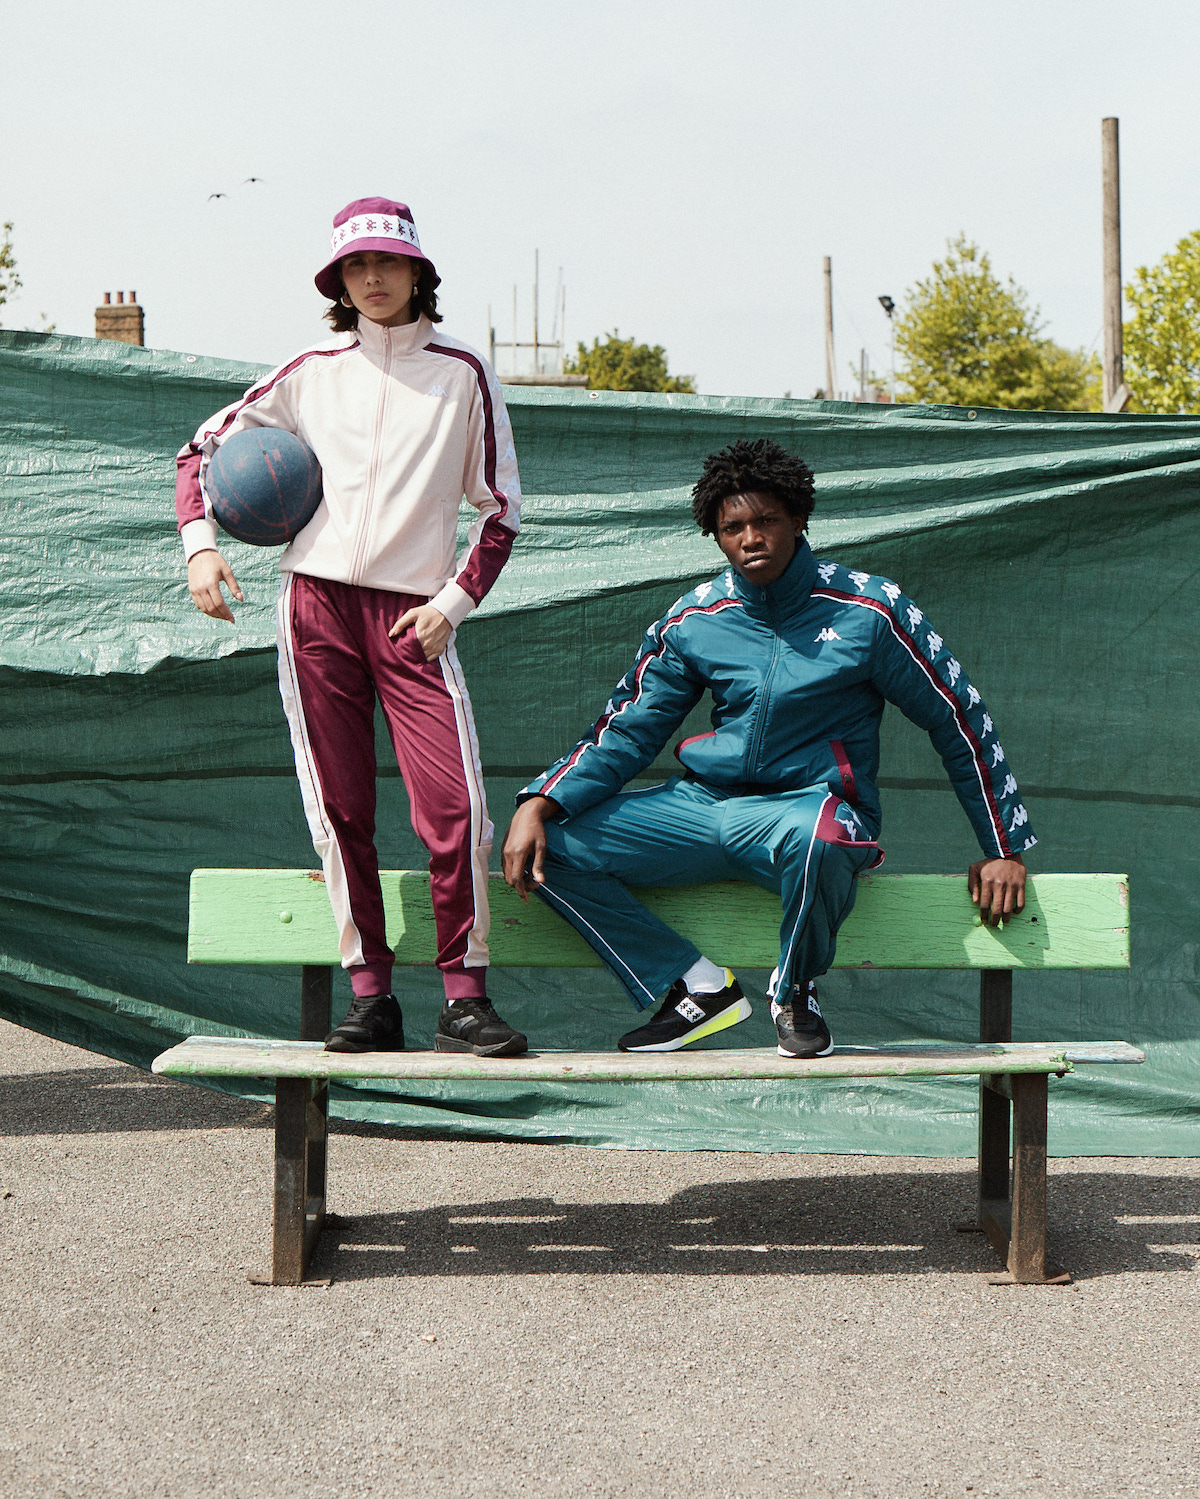 KAPPA Unveils ‘Riders of the Court’ Autumn/Winter 2019 Campaign